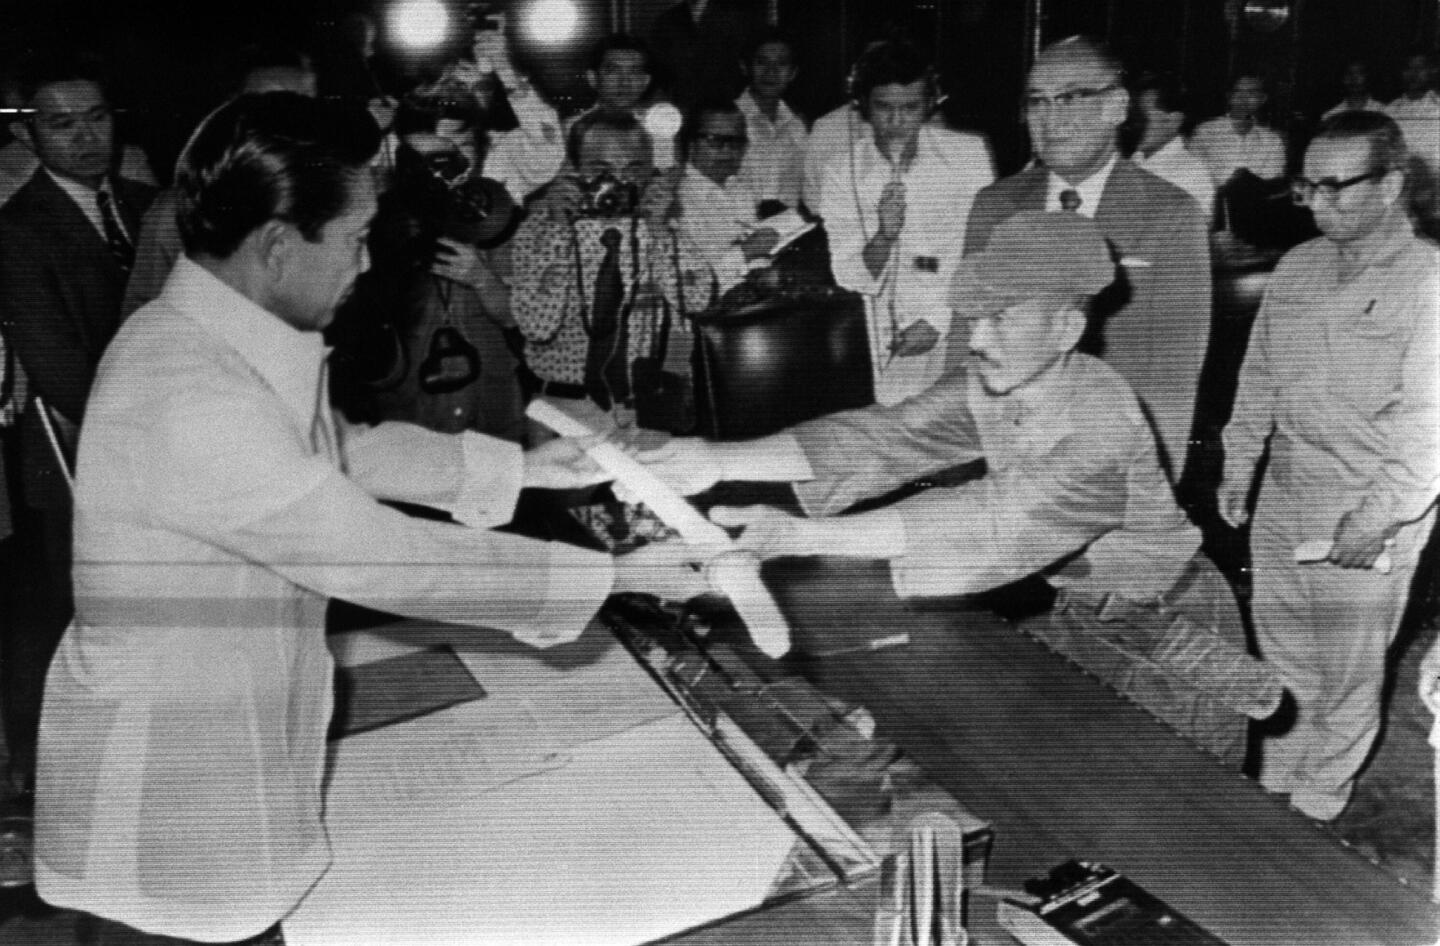 On March 11, 1974, former Japanese imperial army soldier Hiroo Onoda, right, offered his military sword to Philippine President Ferdinand Marcos, left, in surrender at the Malacanan Palace in Manila.